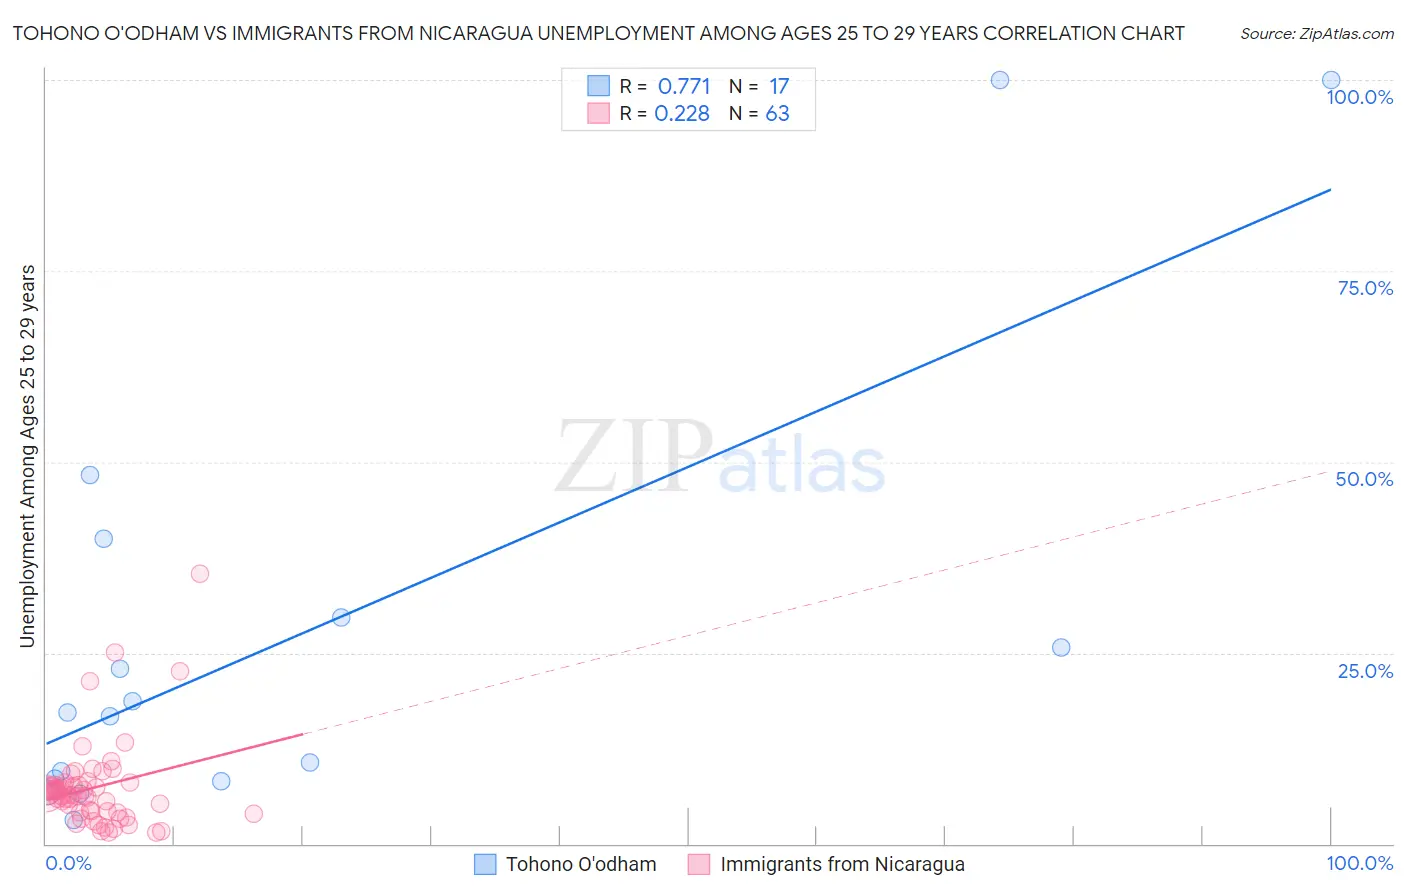 Tohono O'odham vs Immigrants from Nicaragua Unemployment Among Ages 25 to 29 years